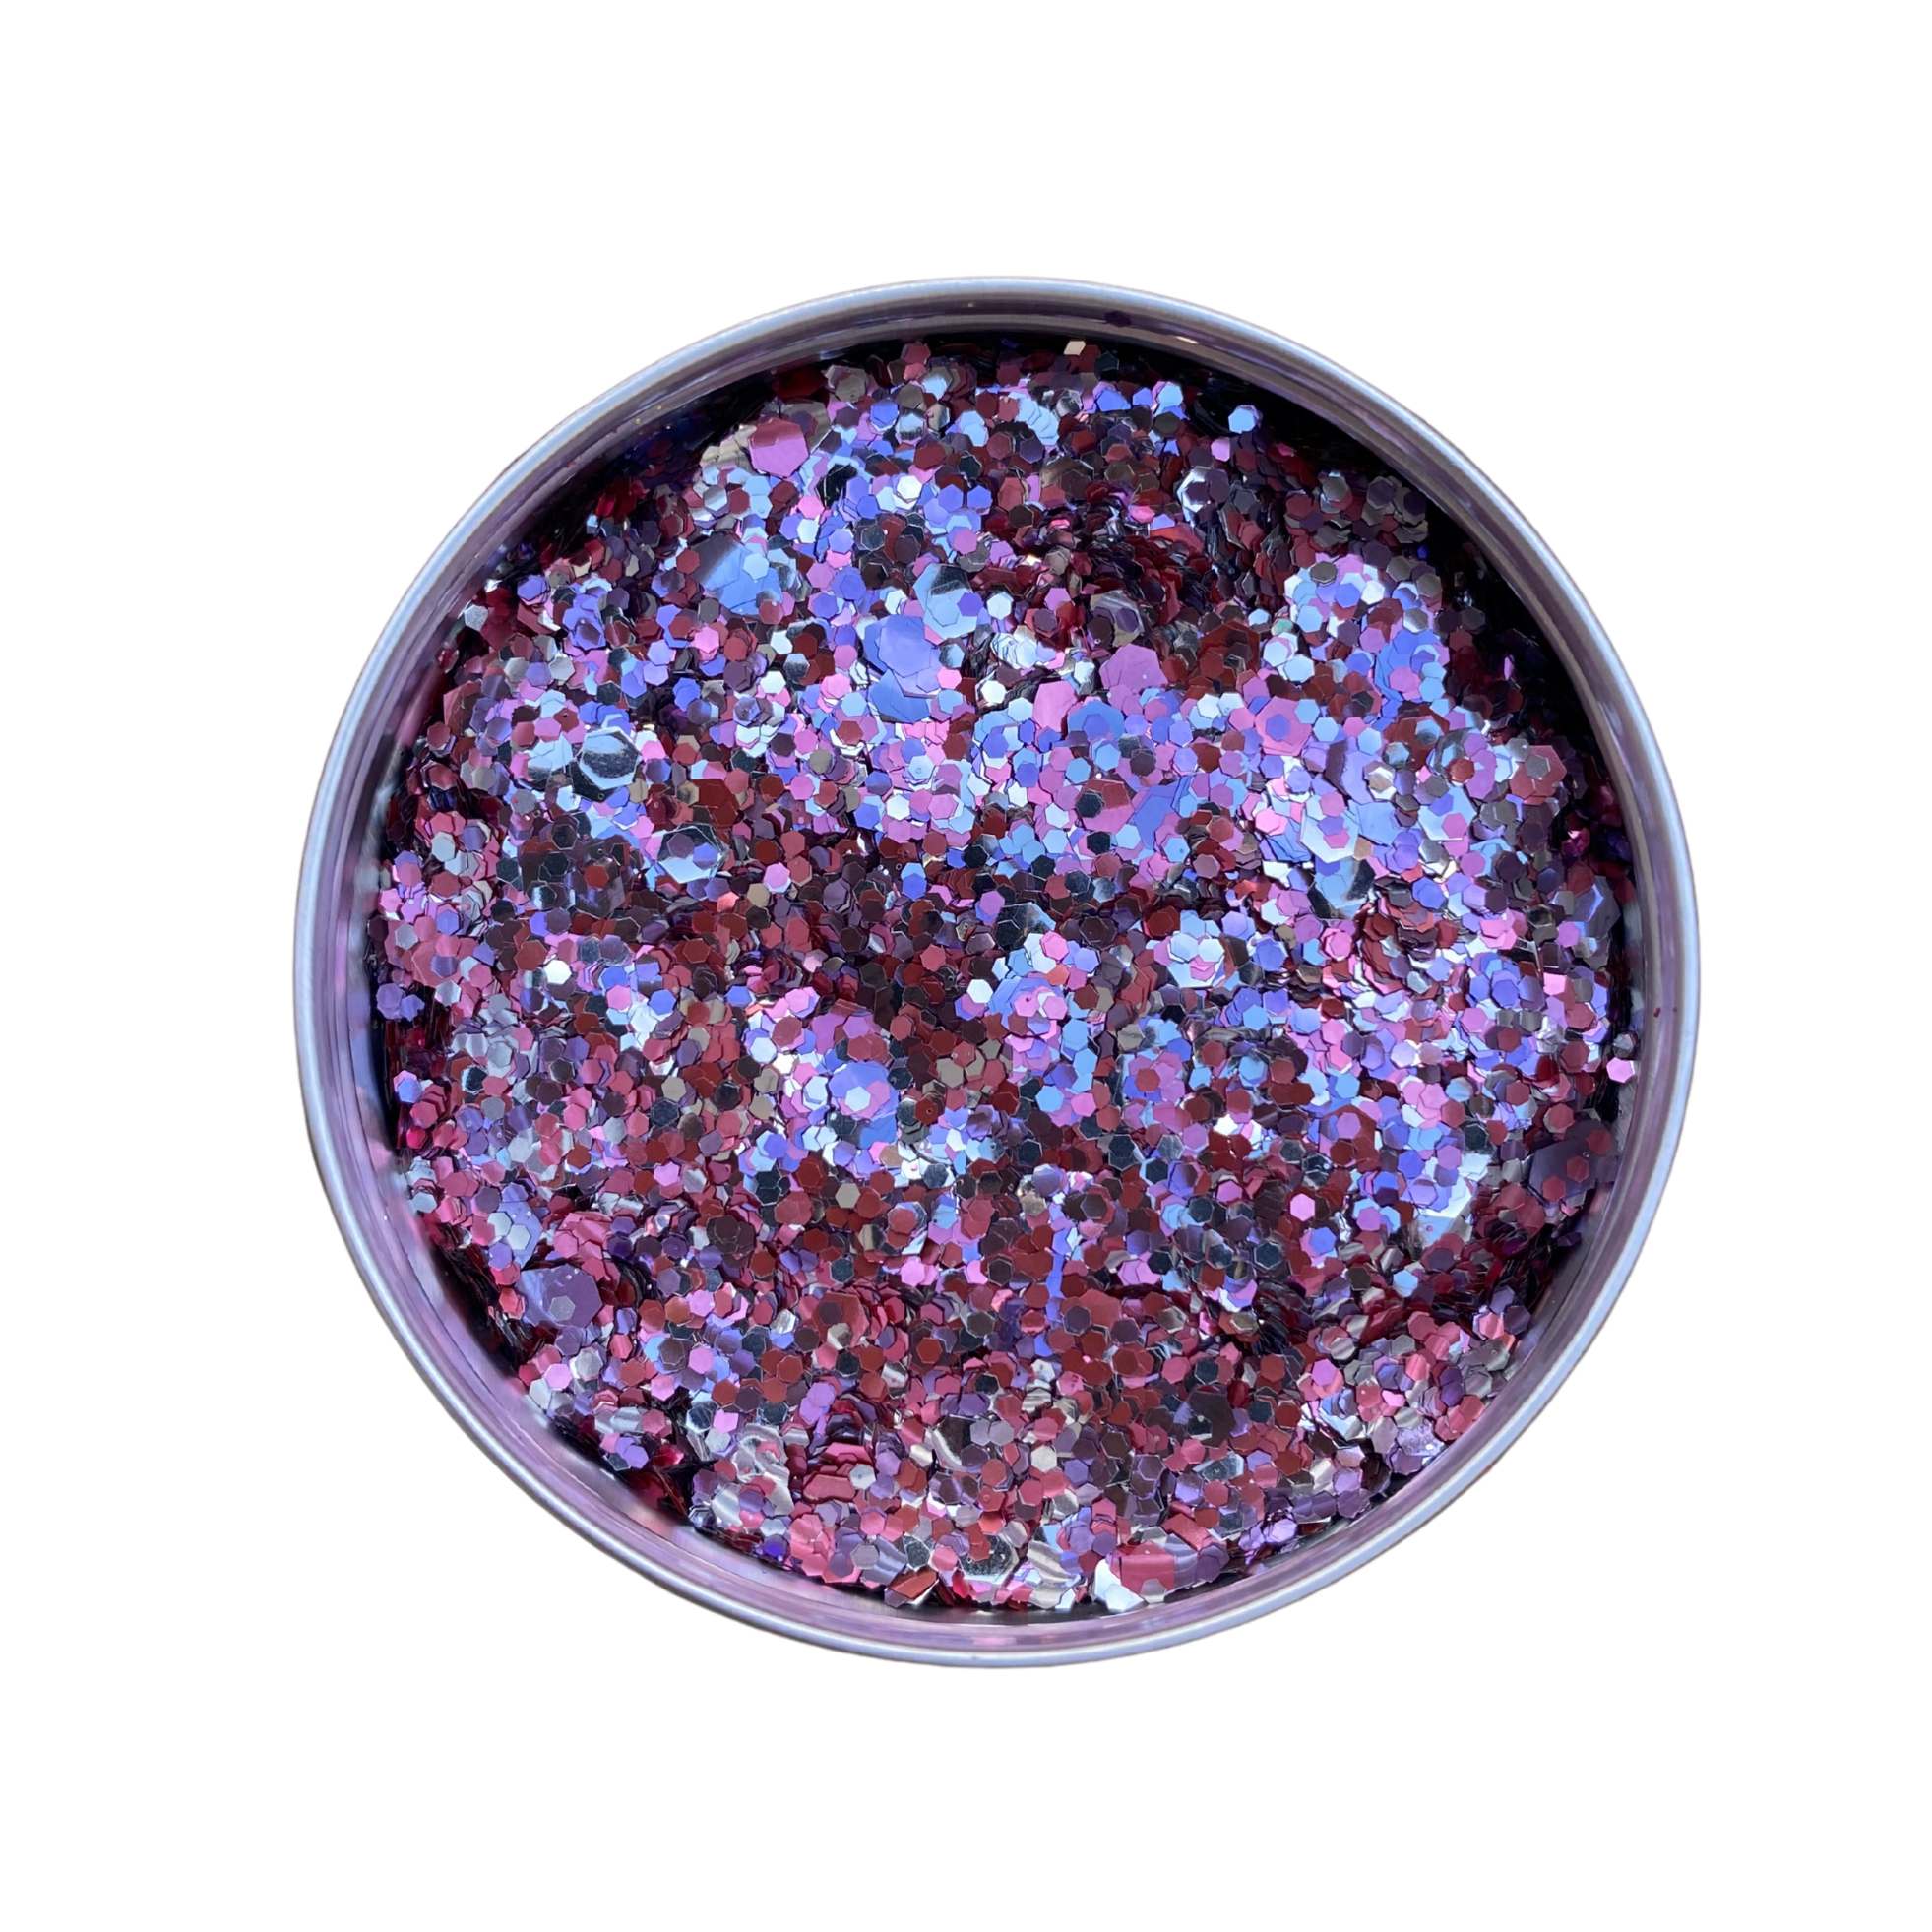 A glittery mix of pink, silver and purple biodegradable cosmetic glitter